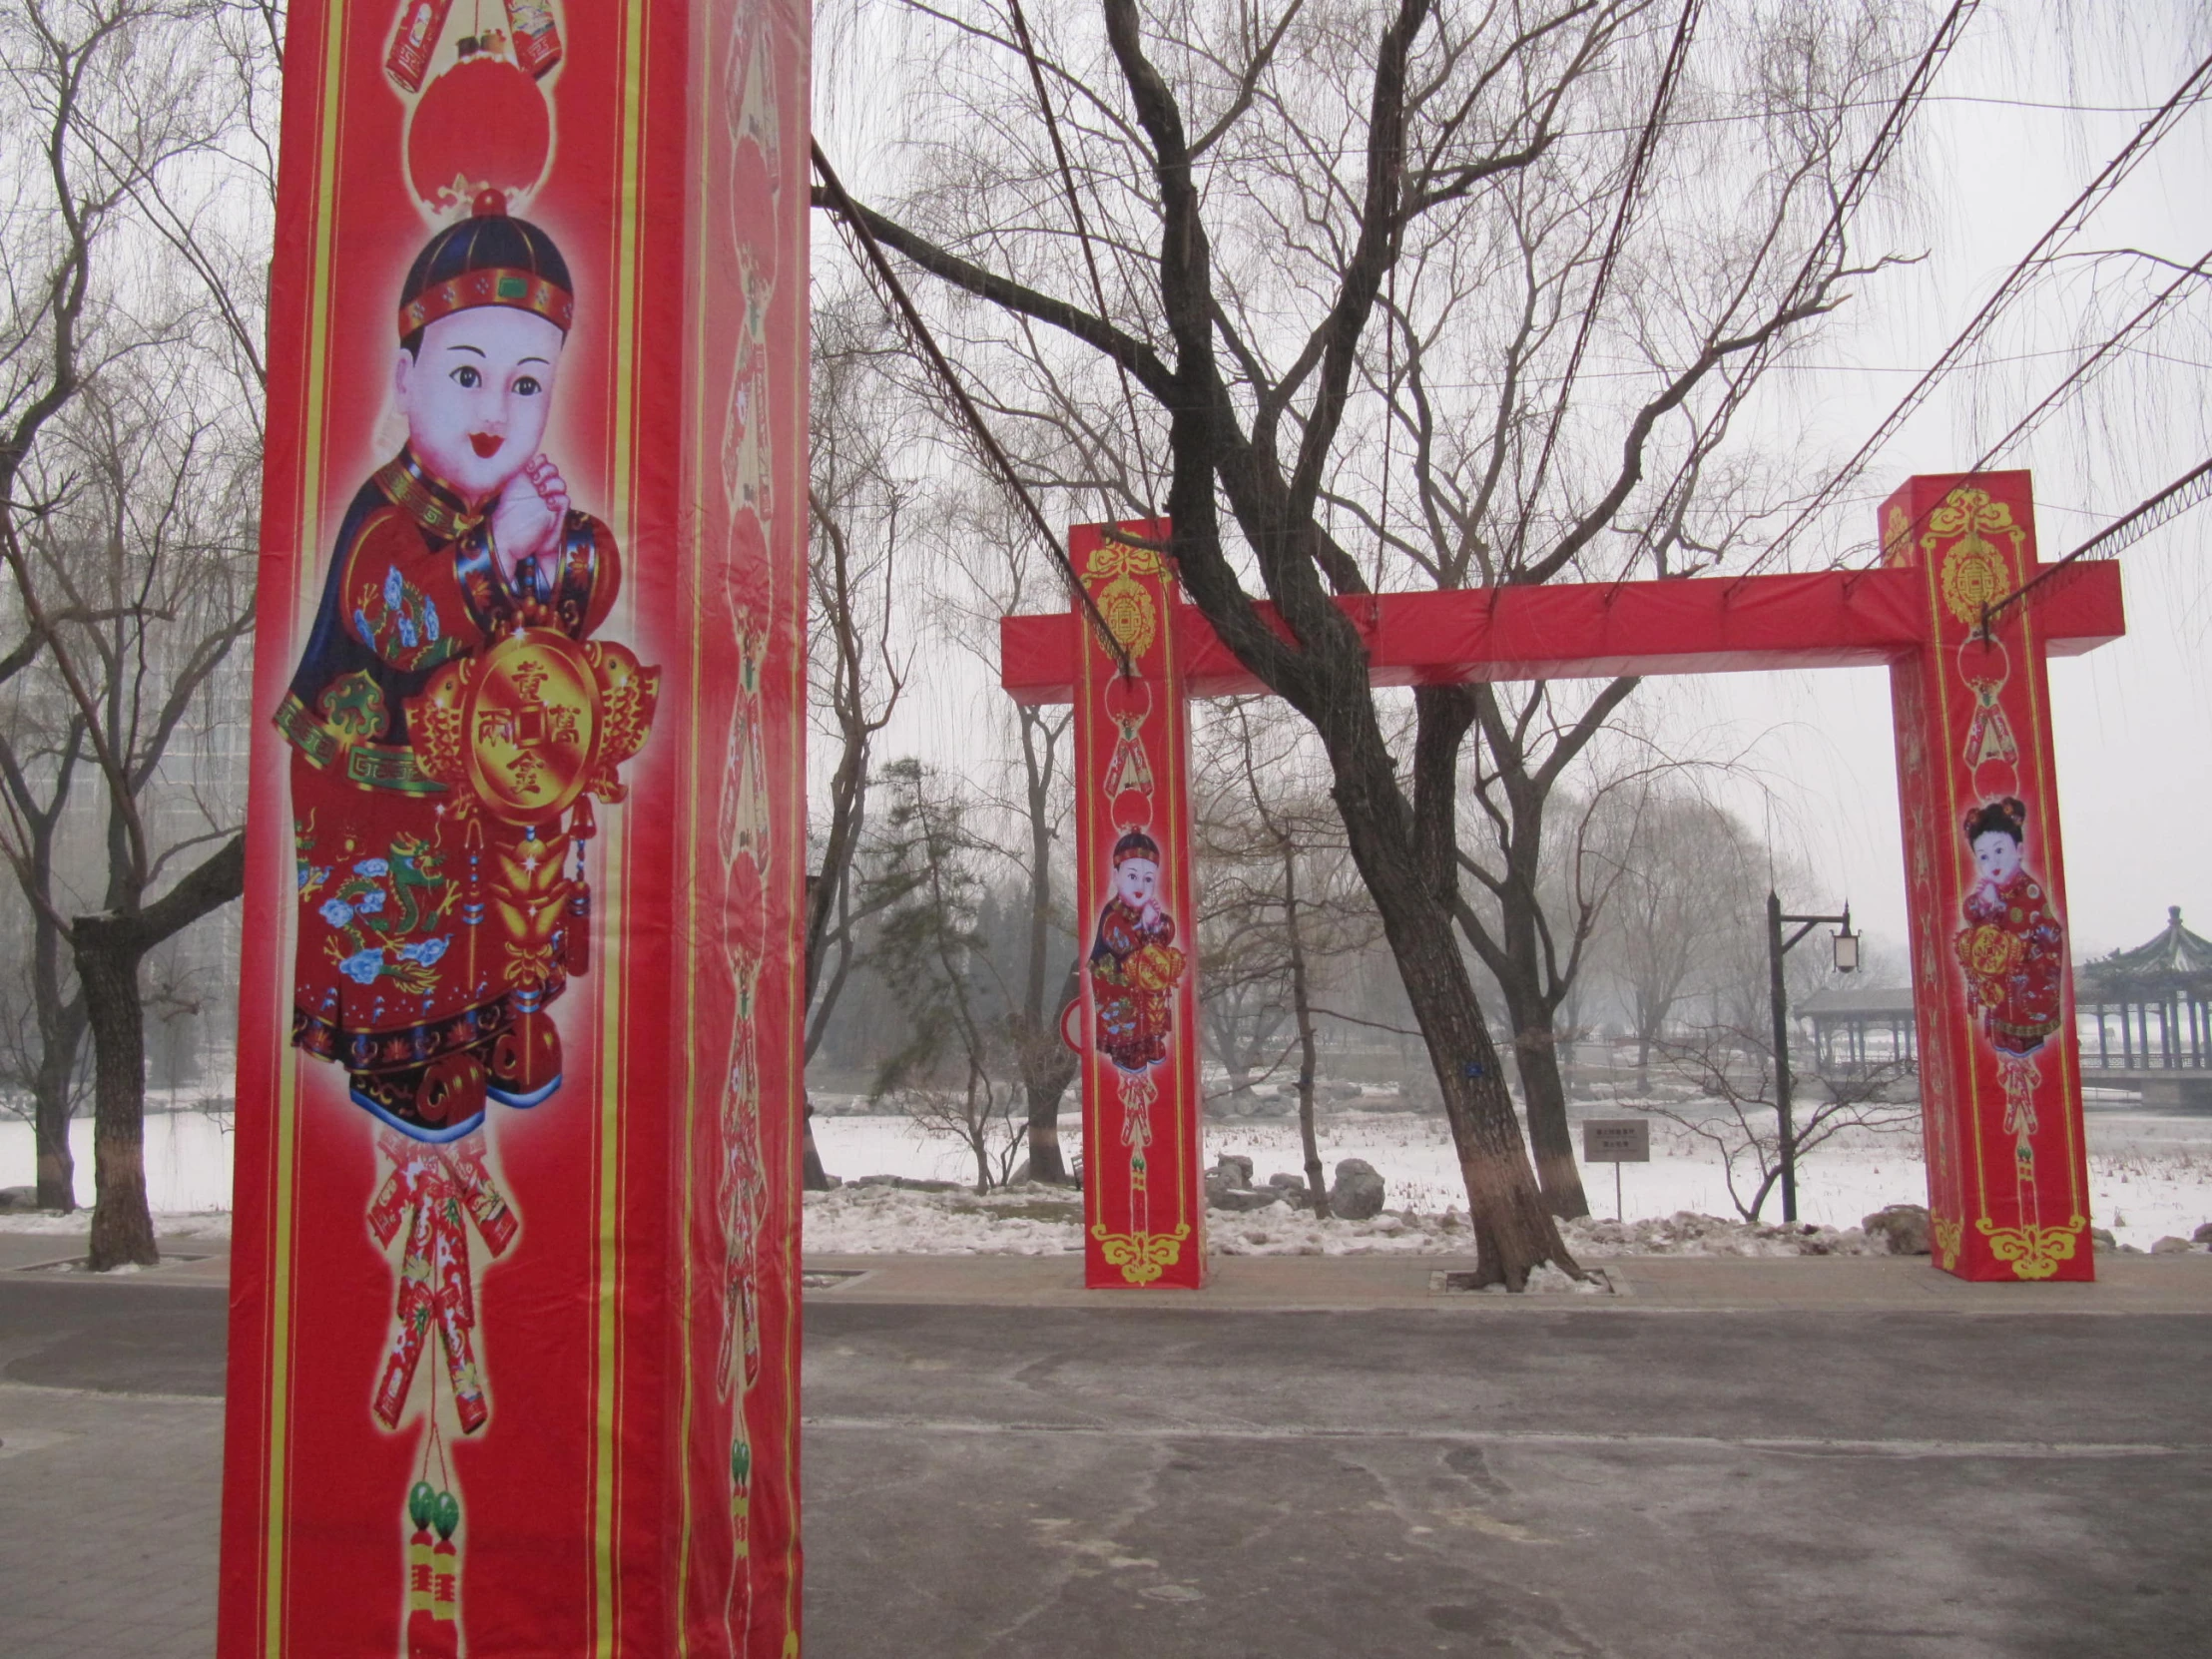 red lanterns decorated with buddha figure and flowers in snow